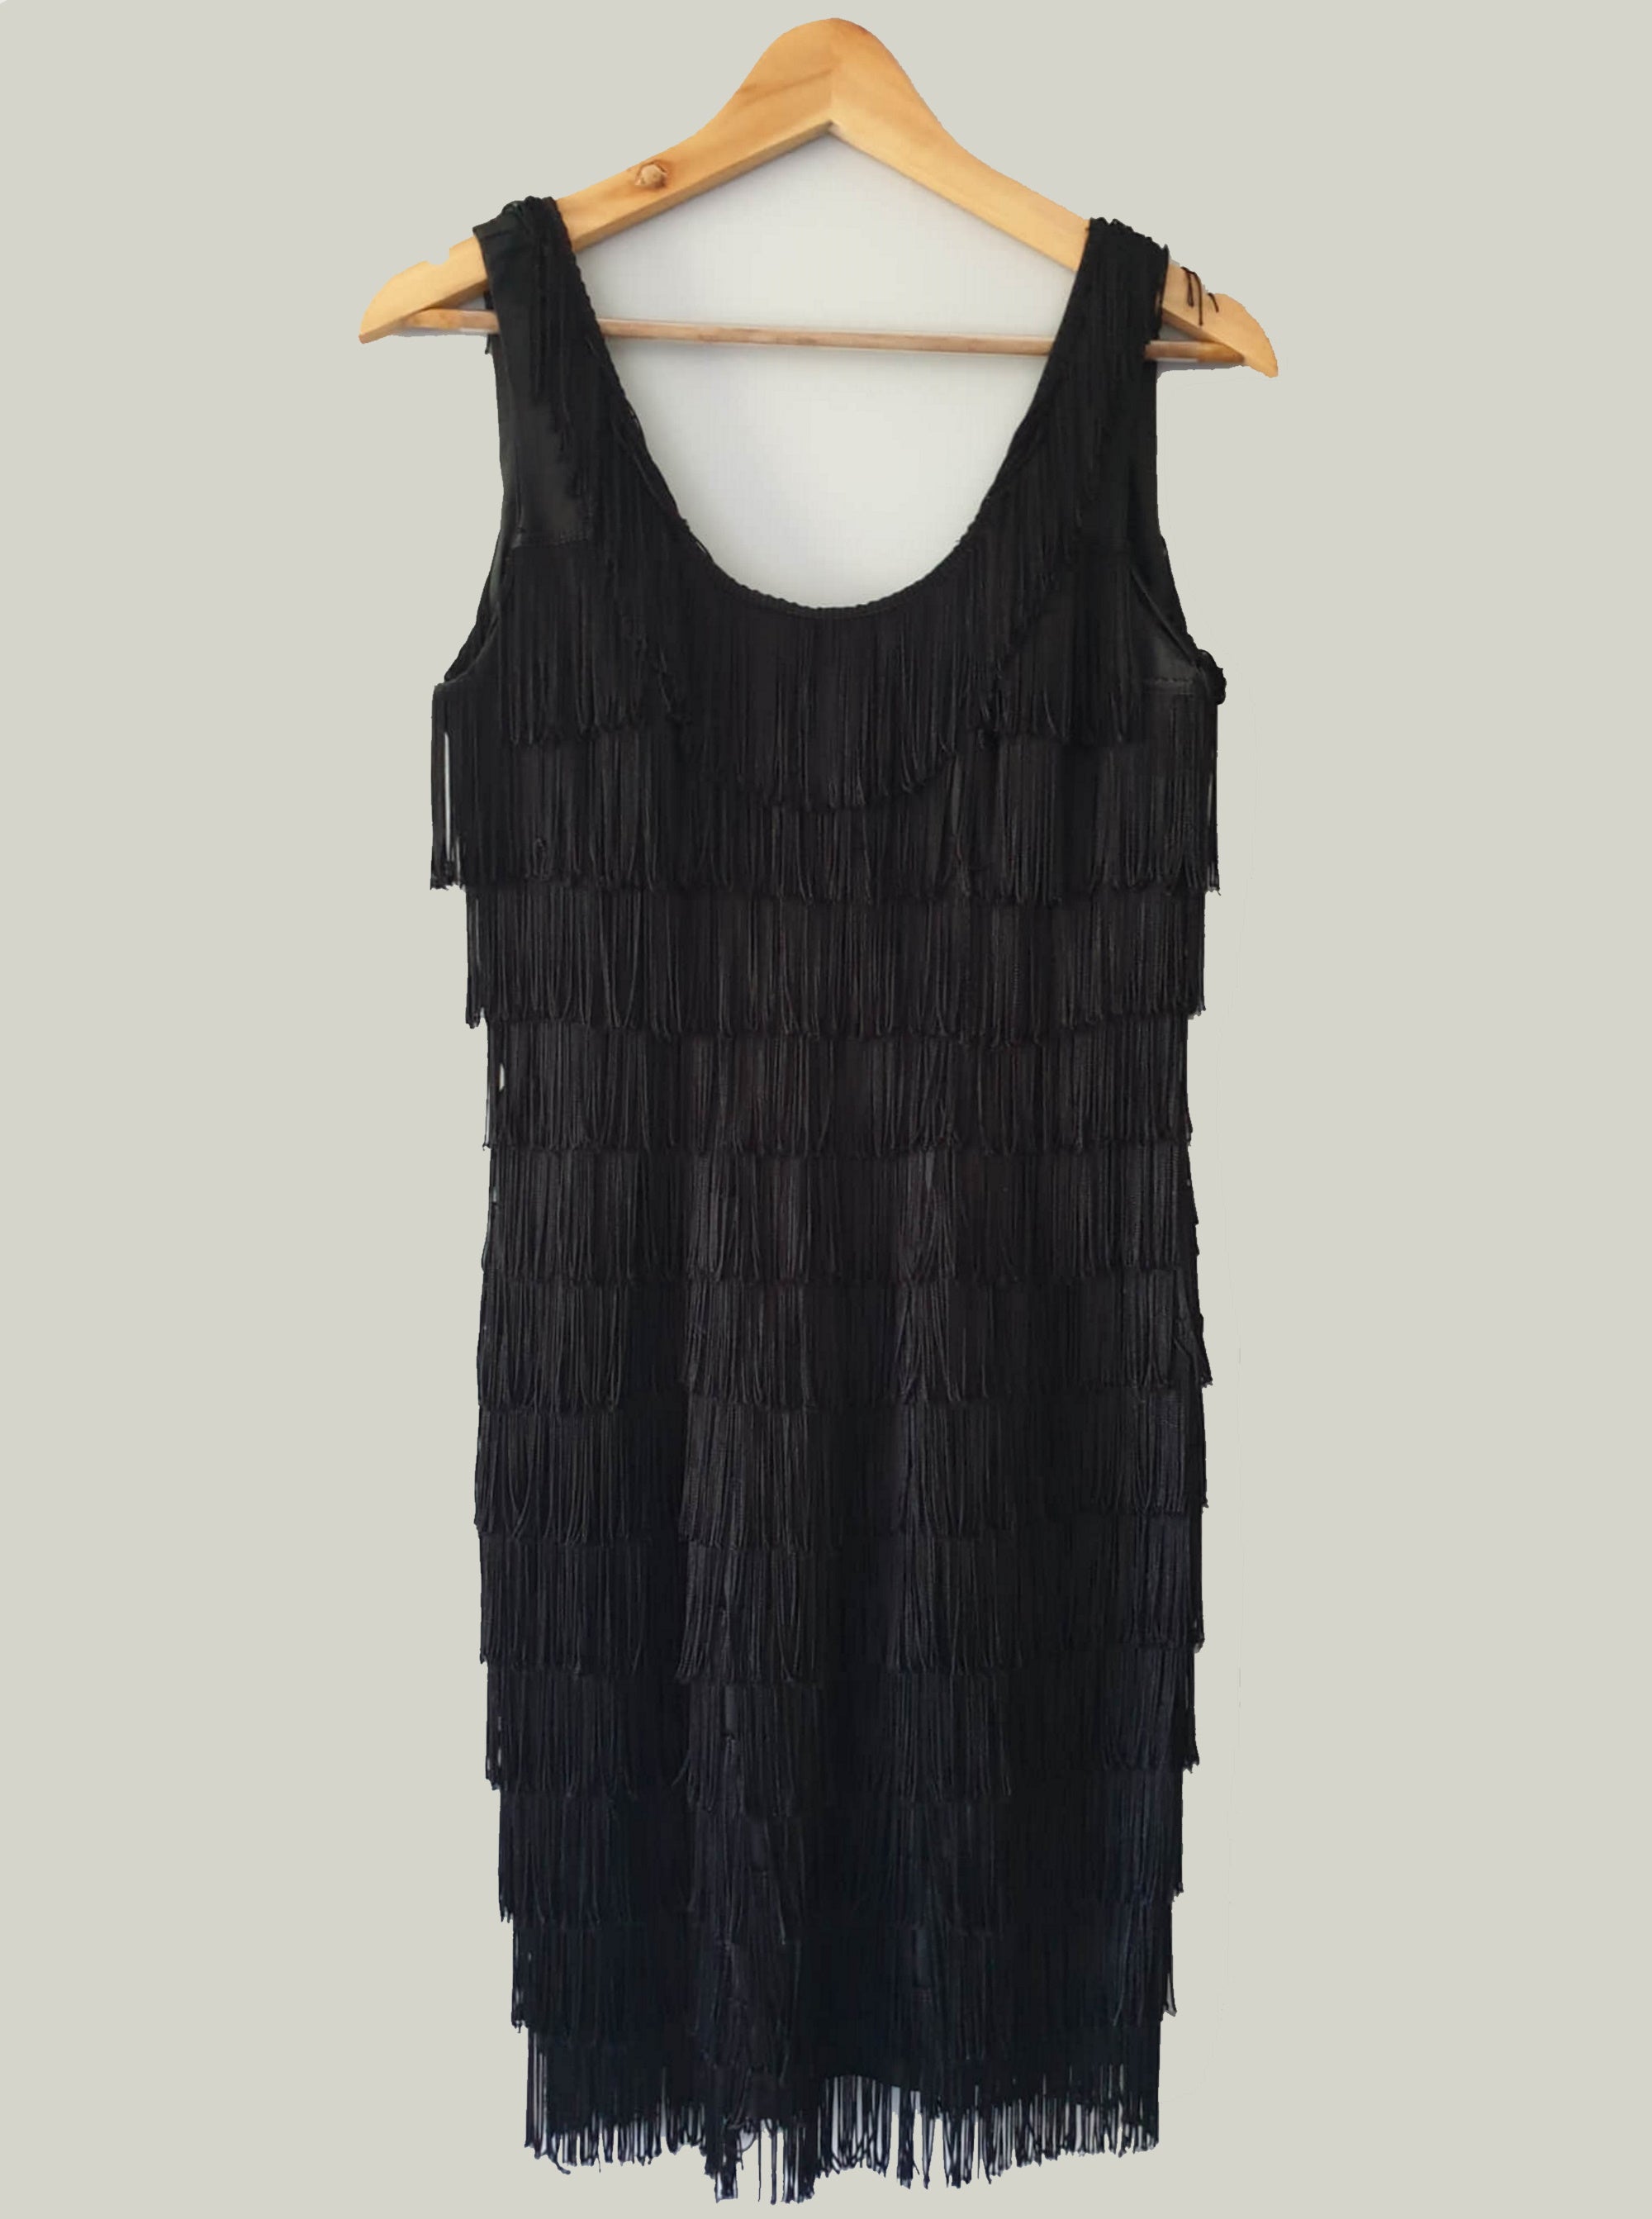 1980s vintage black mini dress with fringing by roberta